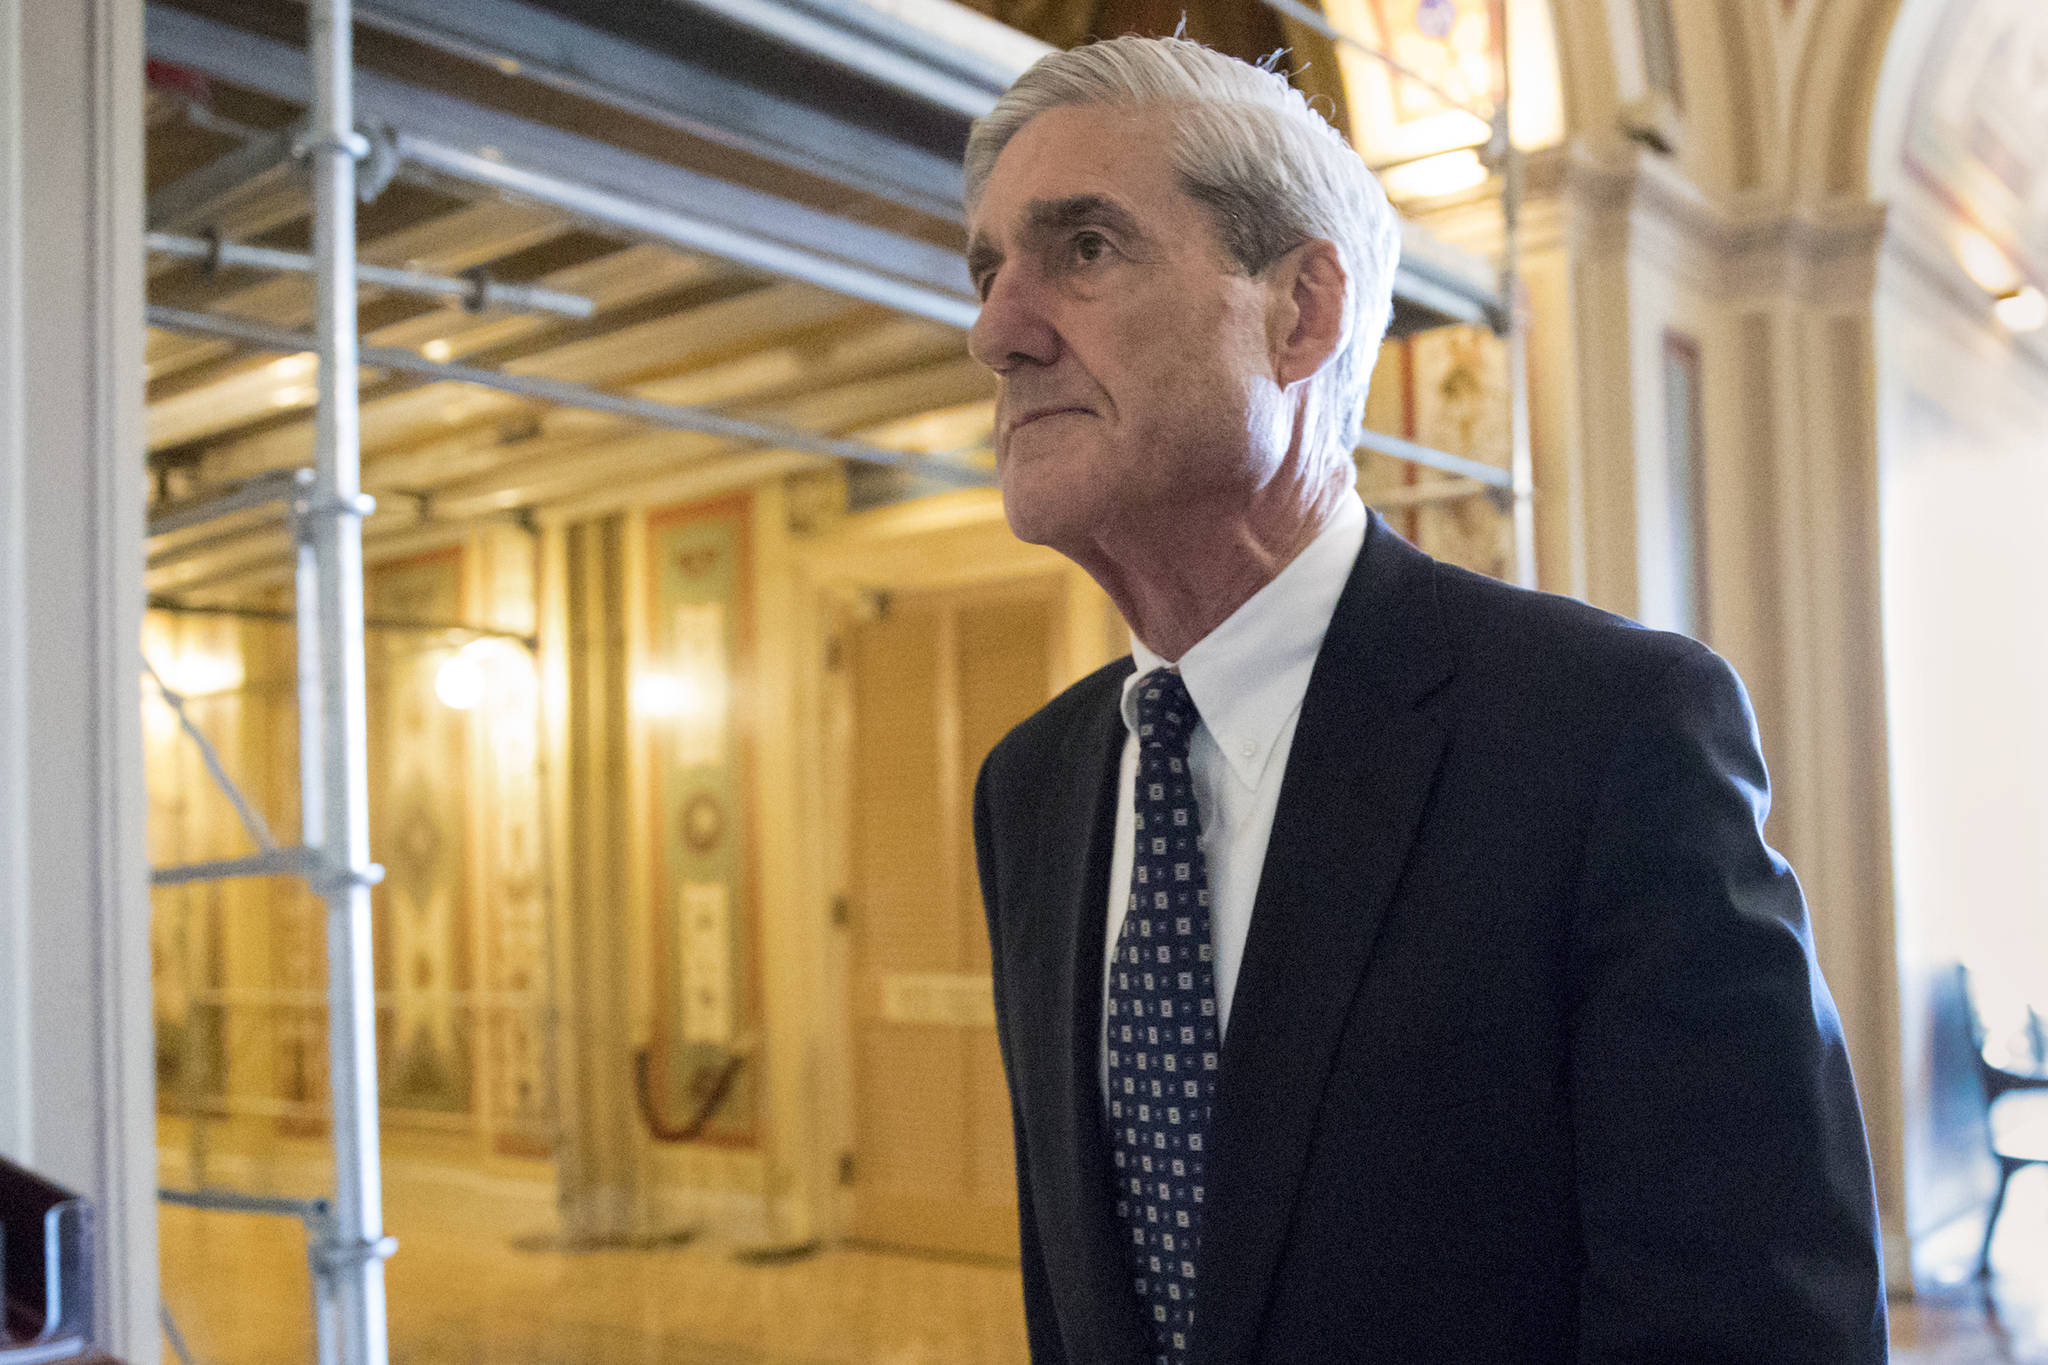 In this June 21, 2017 file photo, special counsel Robert Mueller departs after a closed-door meeting with members of the Senate Judiciary Committee about Russian meddling in the election and possible connection to the Trump campaign, on Capitol Hill in Washington. (AP Photo | J. Scott Applewhite, File)